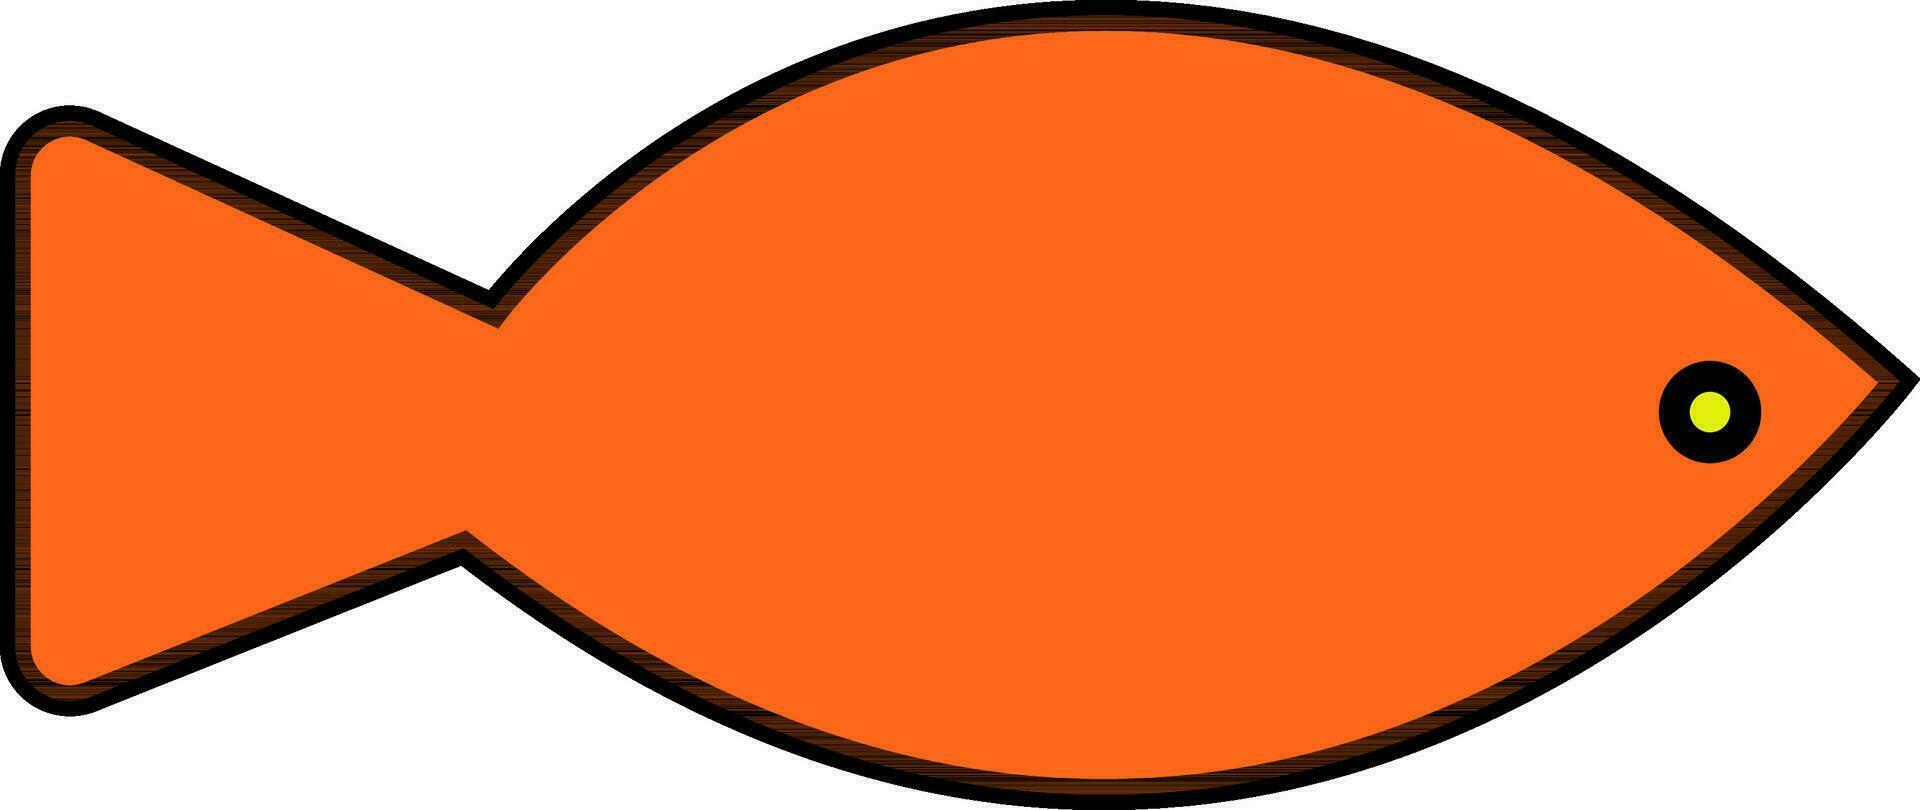 Flat style fish character in orange color. vector